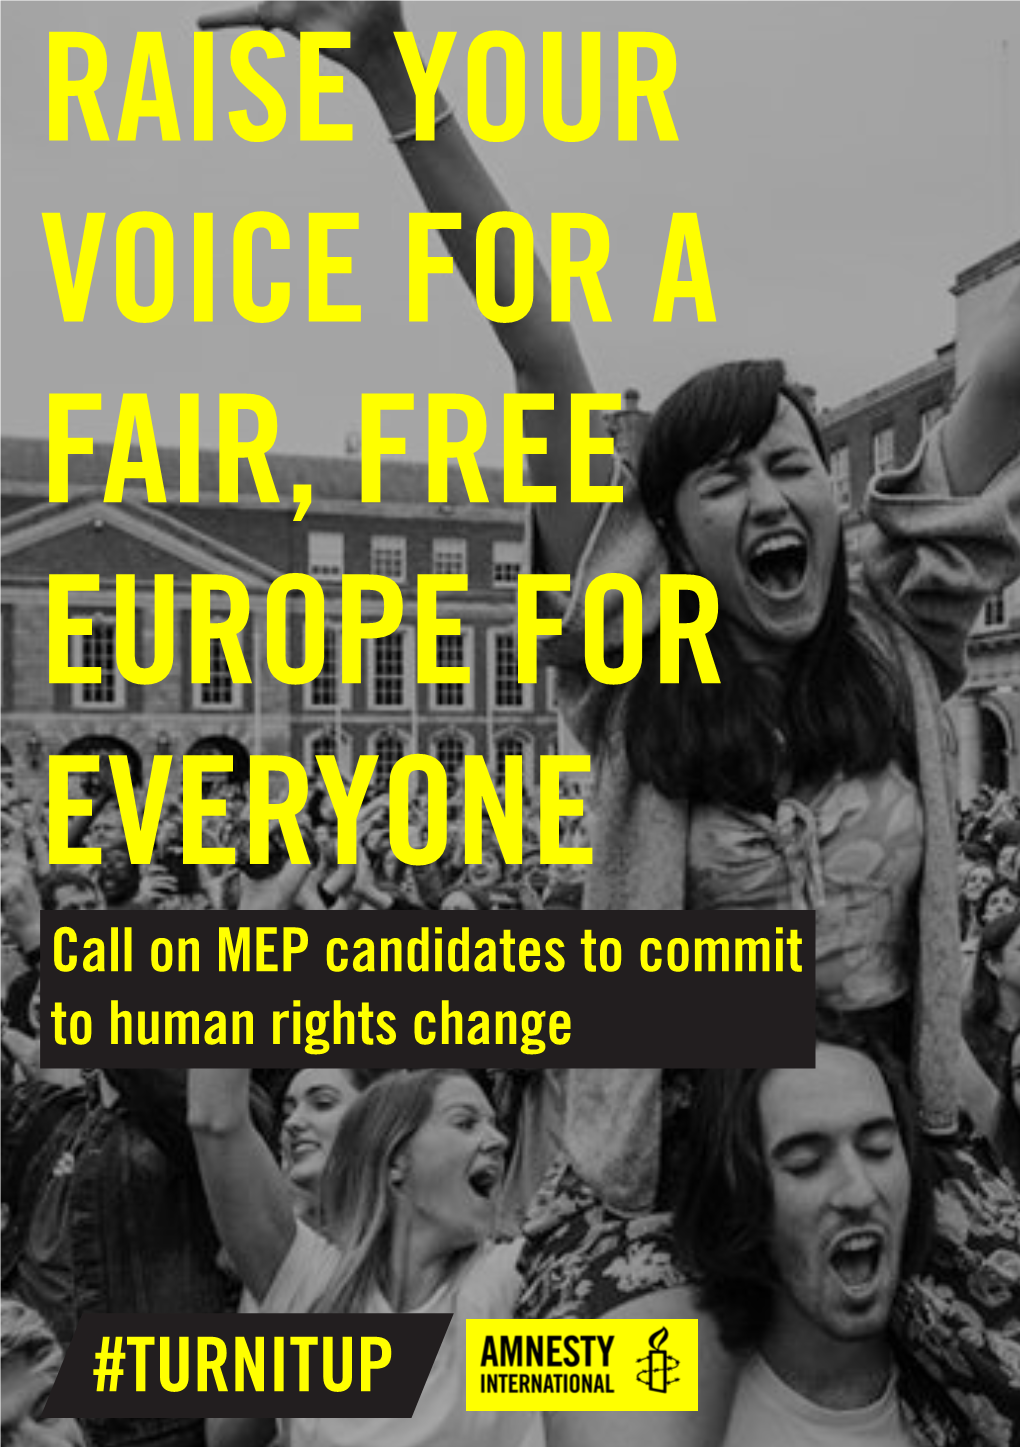 RAISE YOUR VOICE for a FAIR, FREE EUROPE for EVERYONE Call on MEP Candidates to Commit to Human Rights Change